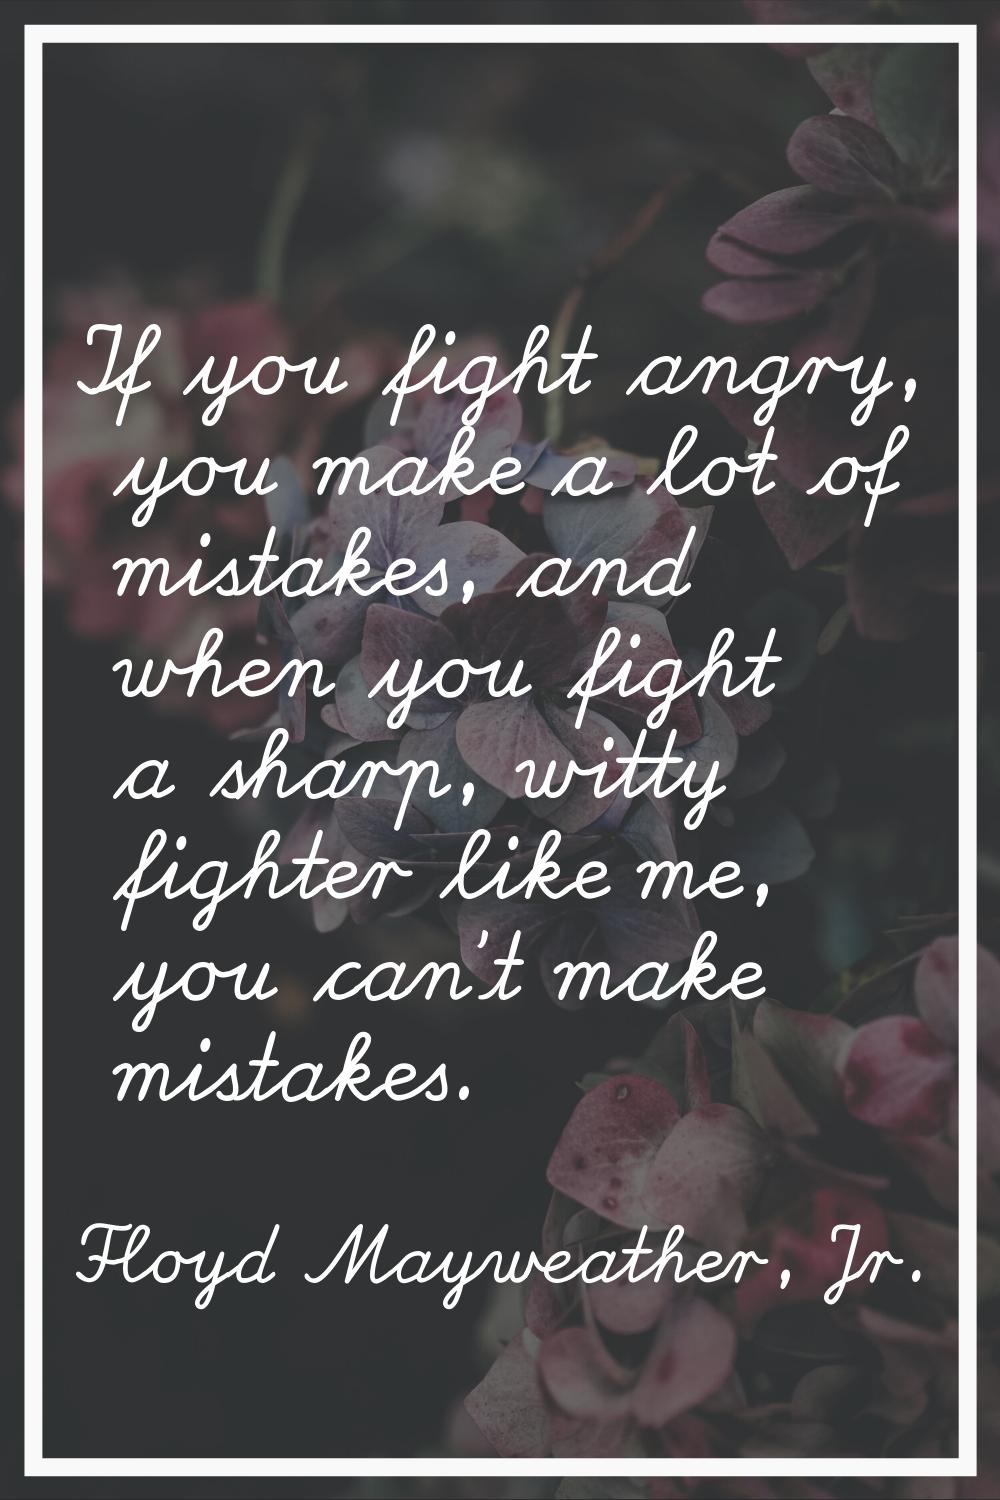 If you fight angry, you make a lot of mistakes, and when you fight a sharp, witty fighter like me, 